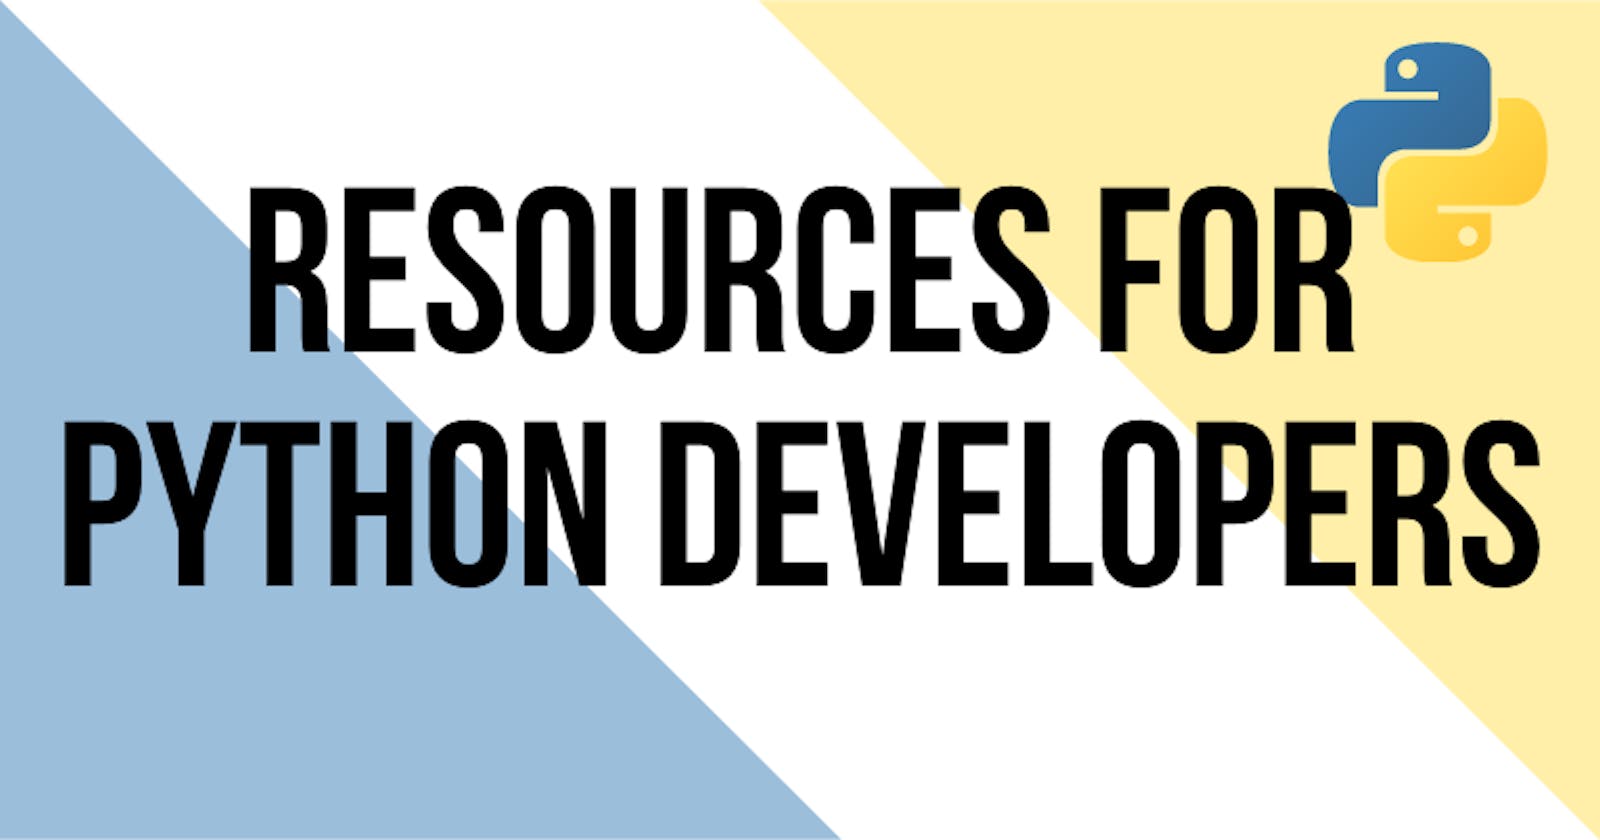 Resources for Python Developers